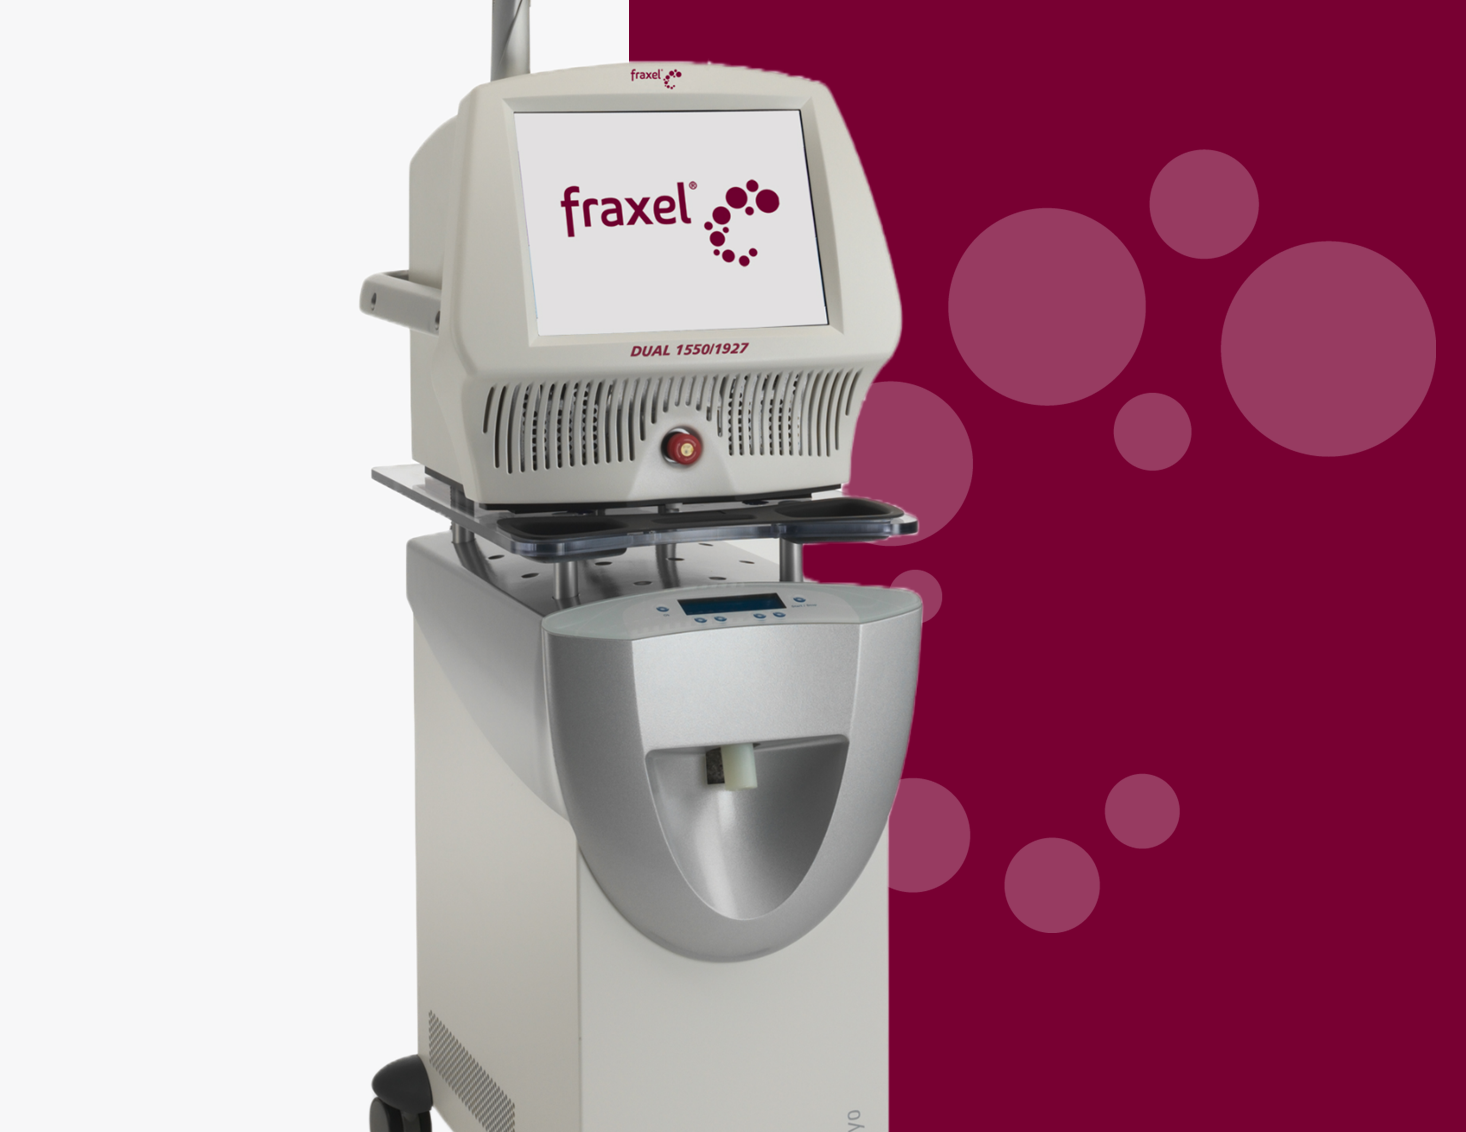 First non-ablative fractional laser for skin resurfacing